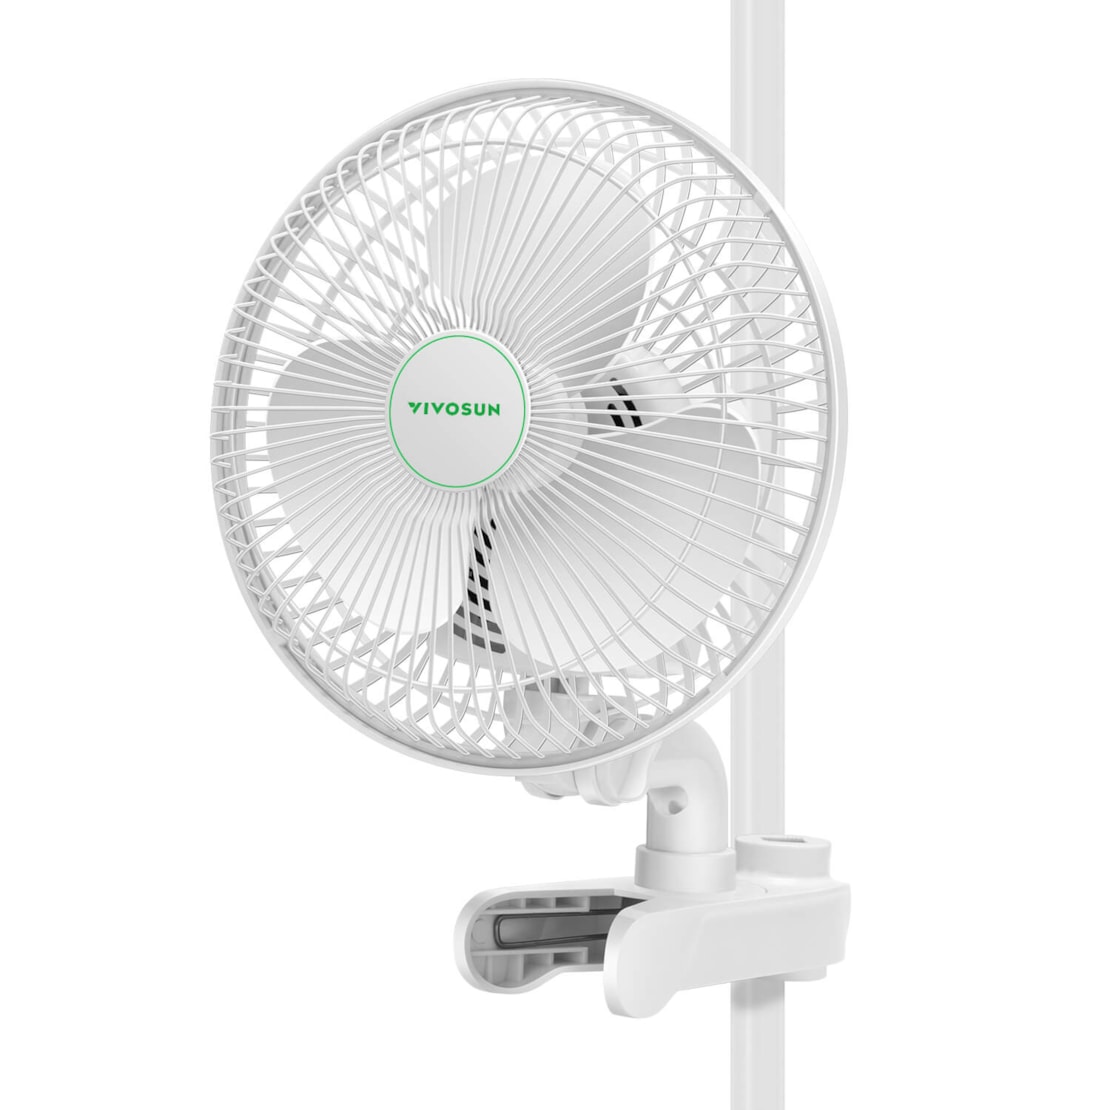 VIVOSUN AeroWave A6 Patented Clip-On Fan with 2-Speed Adjustment, Horizontal Vertical Oscillation, White